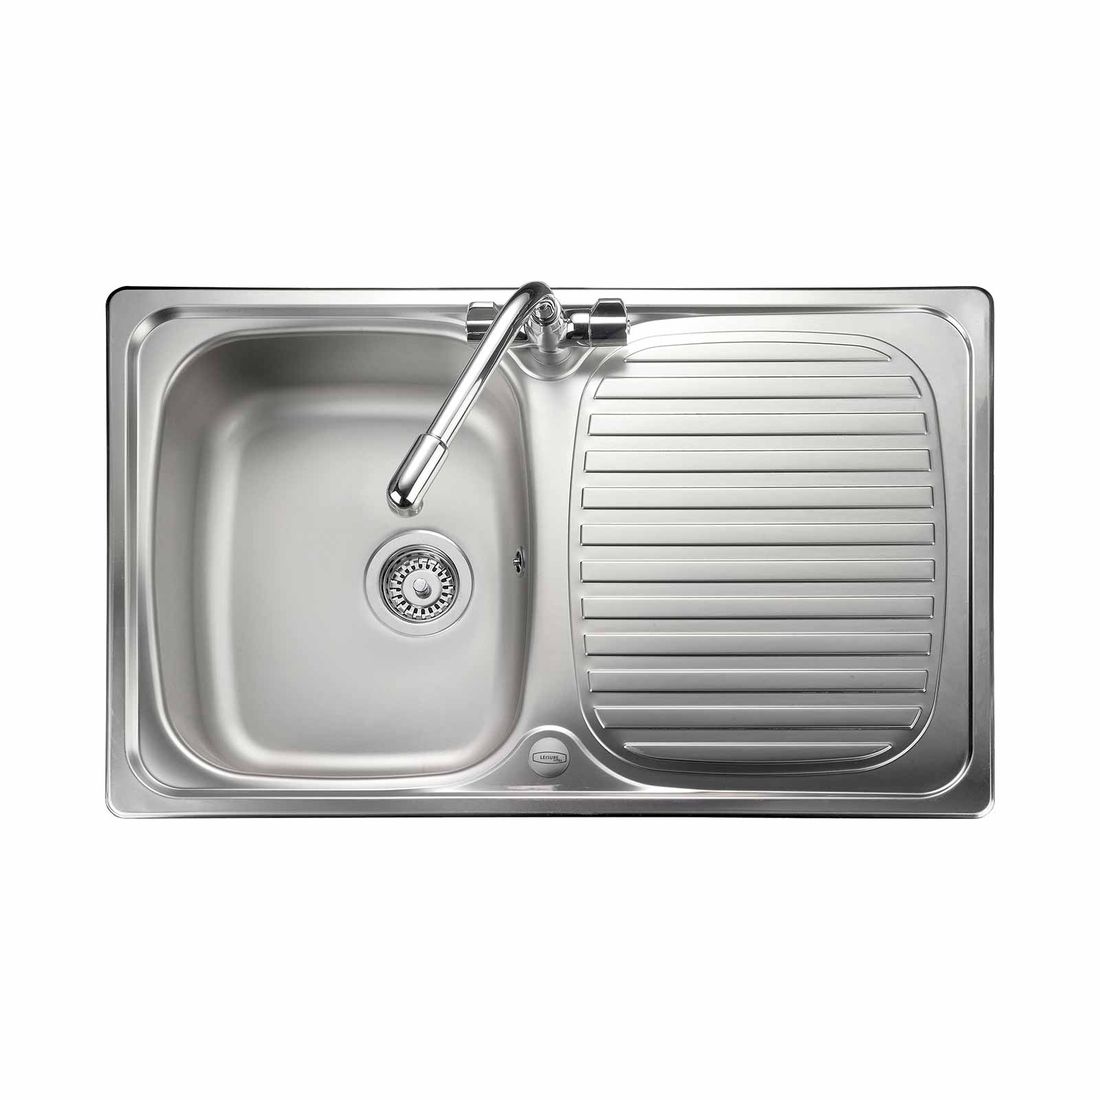 Leisure Compact 1.0 Bowl Sink 800 X 508Mm S/Steel 1Th Reversible